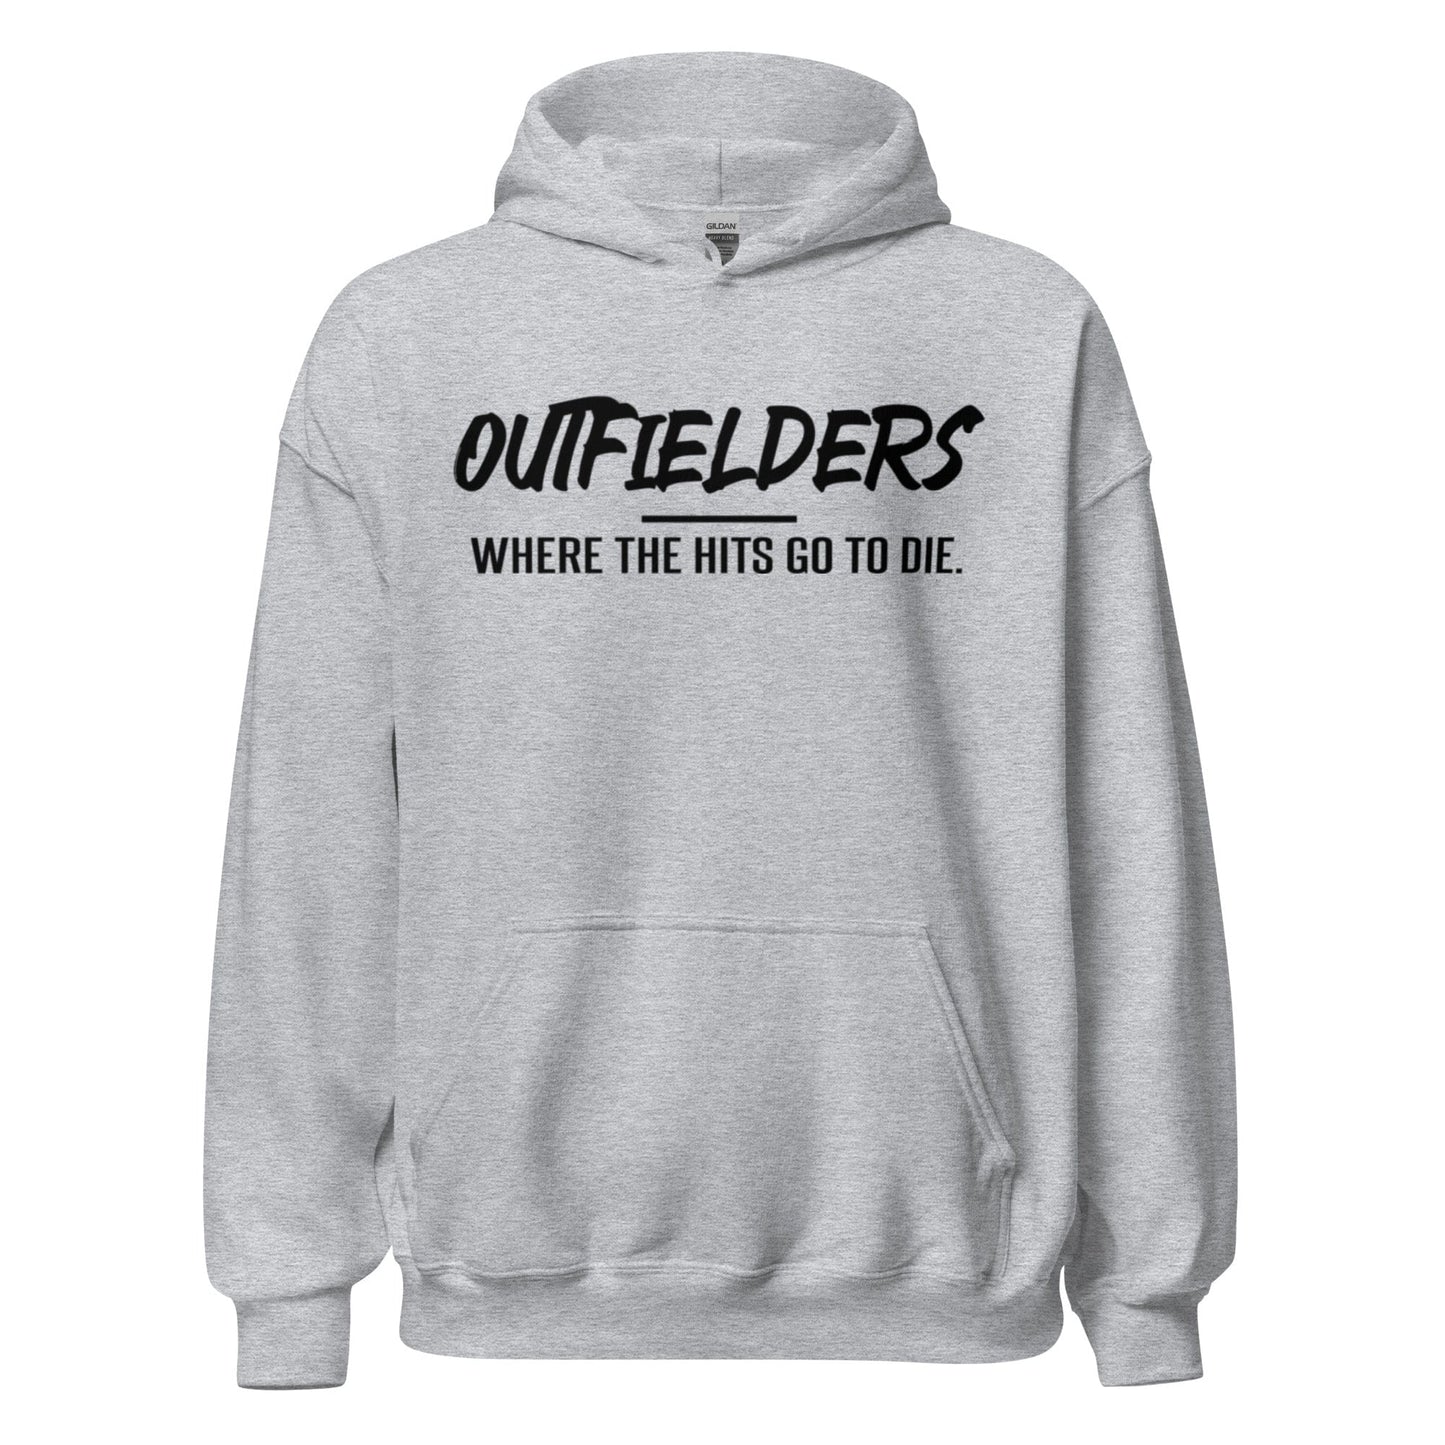 Outfielders: Where The Hits Go To Die - Adult Hoodie